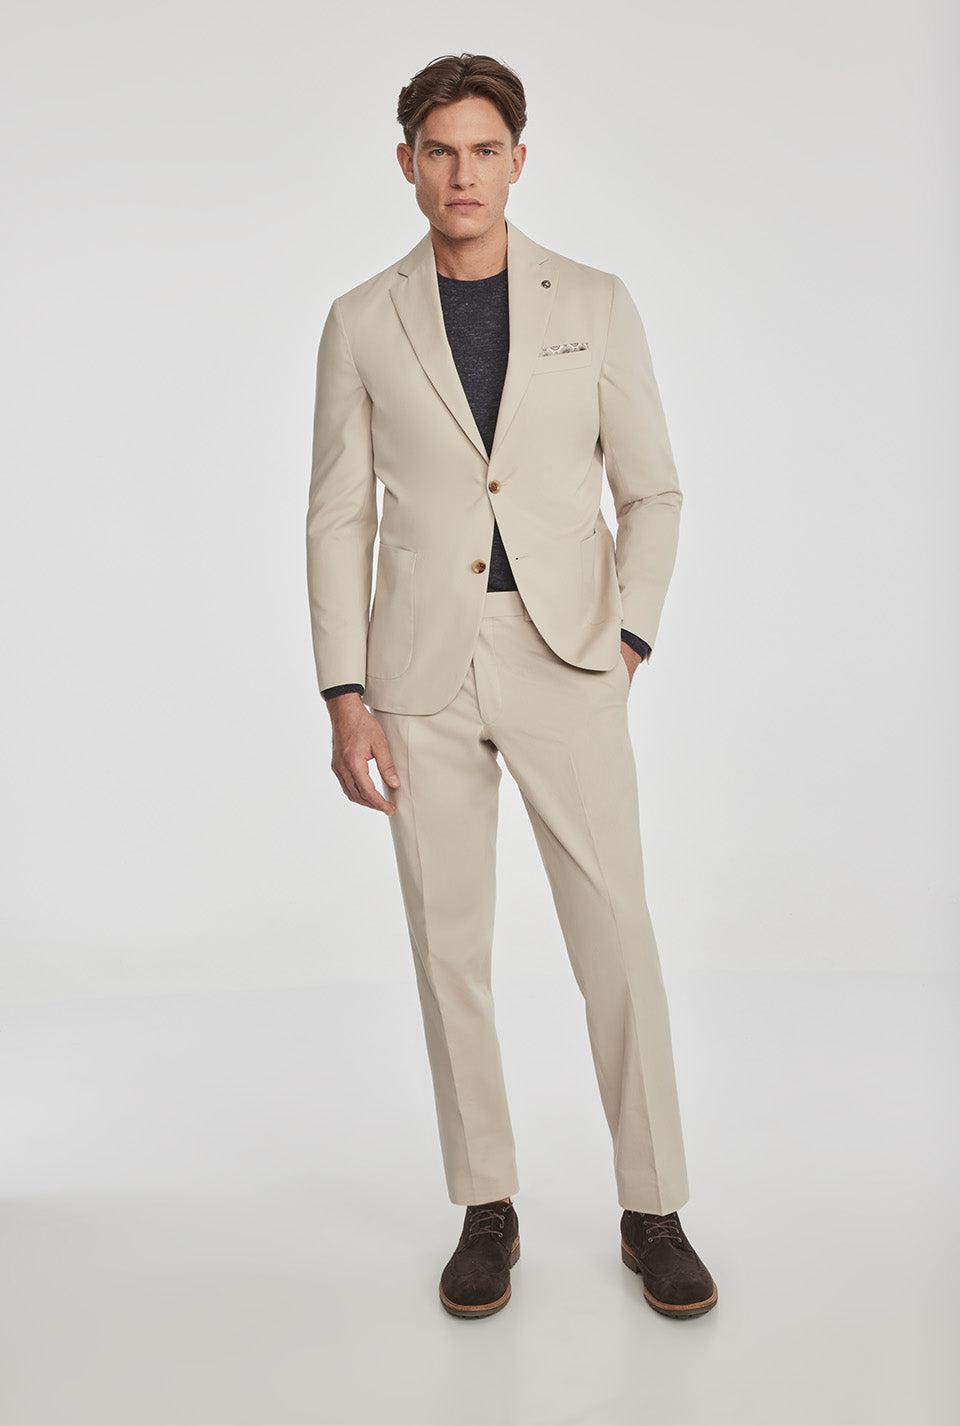 Alt view Irving Solid Cotton and Cashmere Stretch Suit in Tan